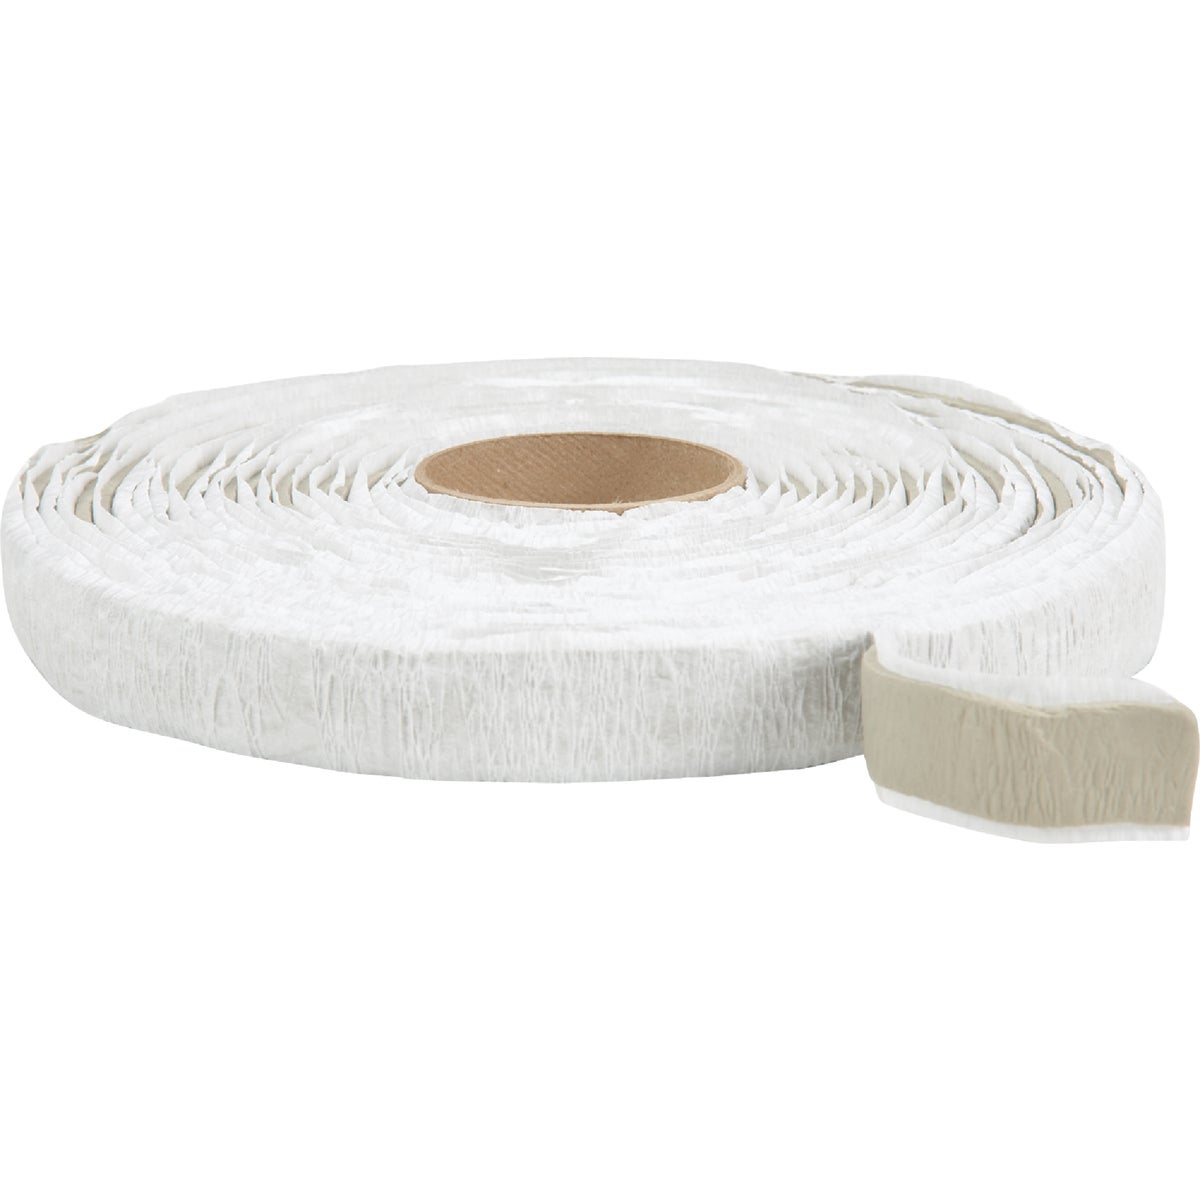 United States Hardware 1/8 In. x 3/4 In. x 30 Ft. Butyl Putty Tape